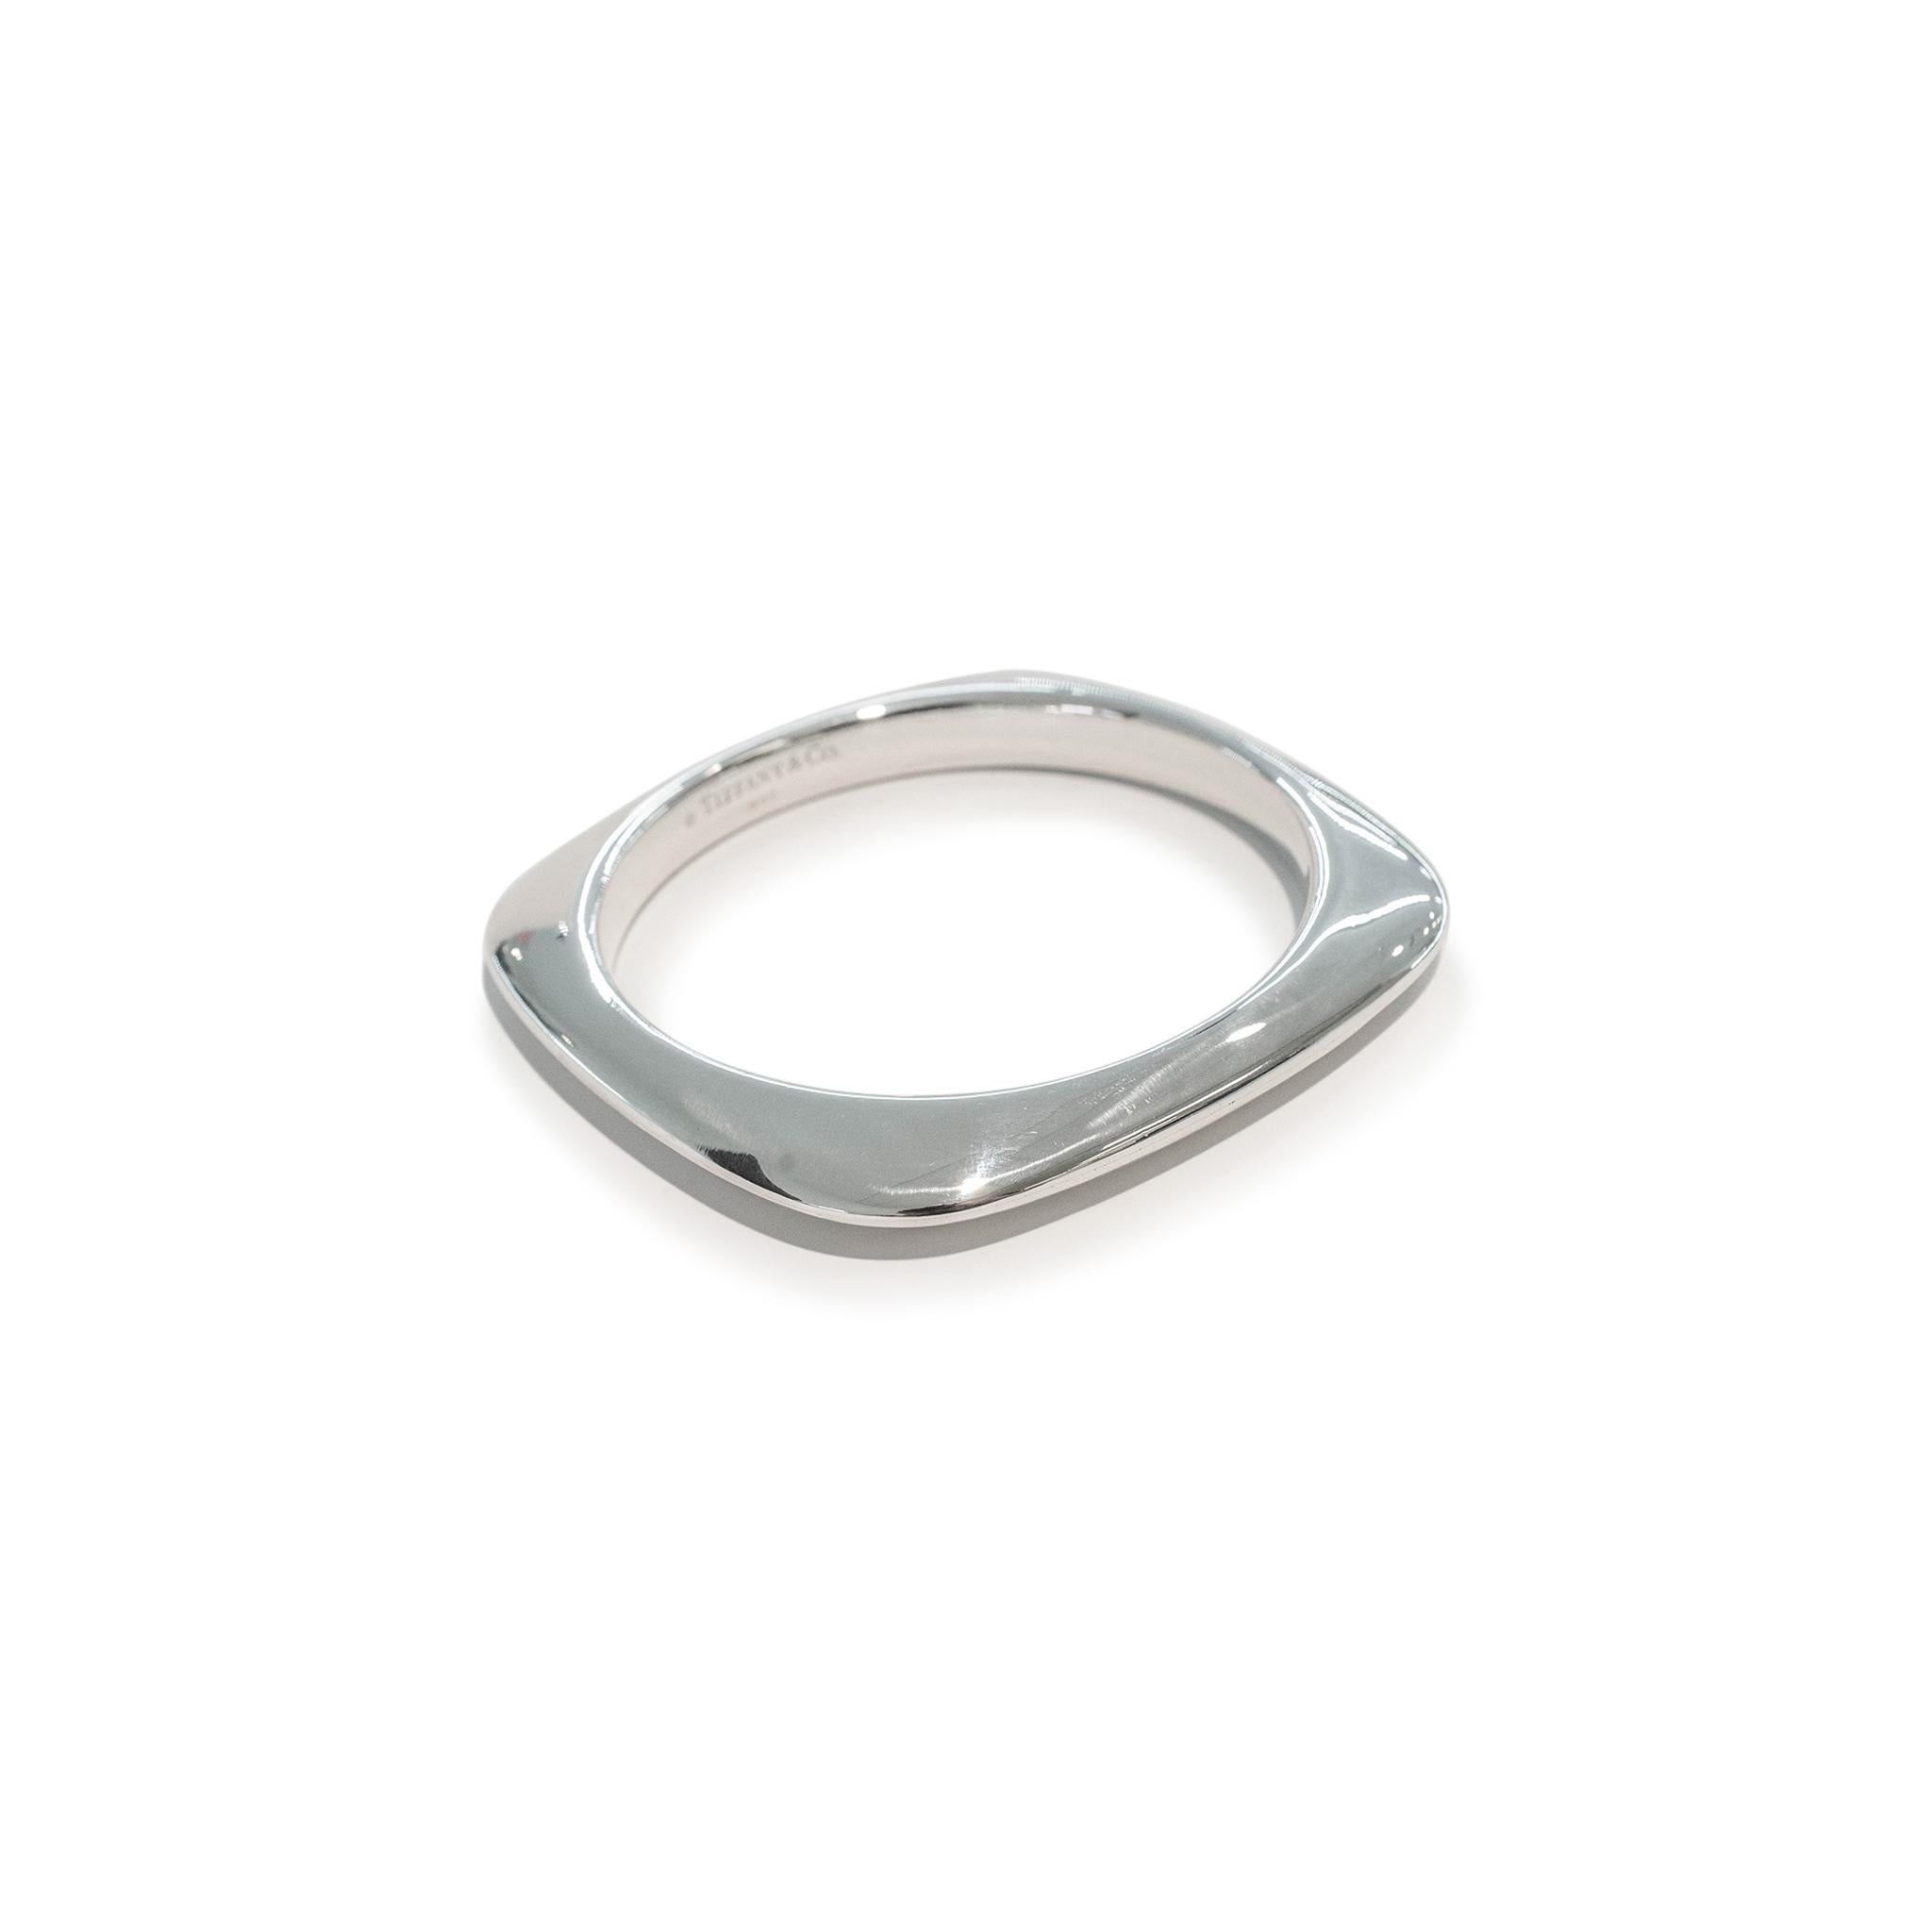 Brand: Tiffany & Co.

Material: 925 Sterling Silver

Length: 7.75 inches

Width: 9.00mm

Weight: 61.80 grams
Silver bangle bracelet. Engraved with 